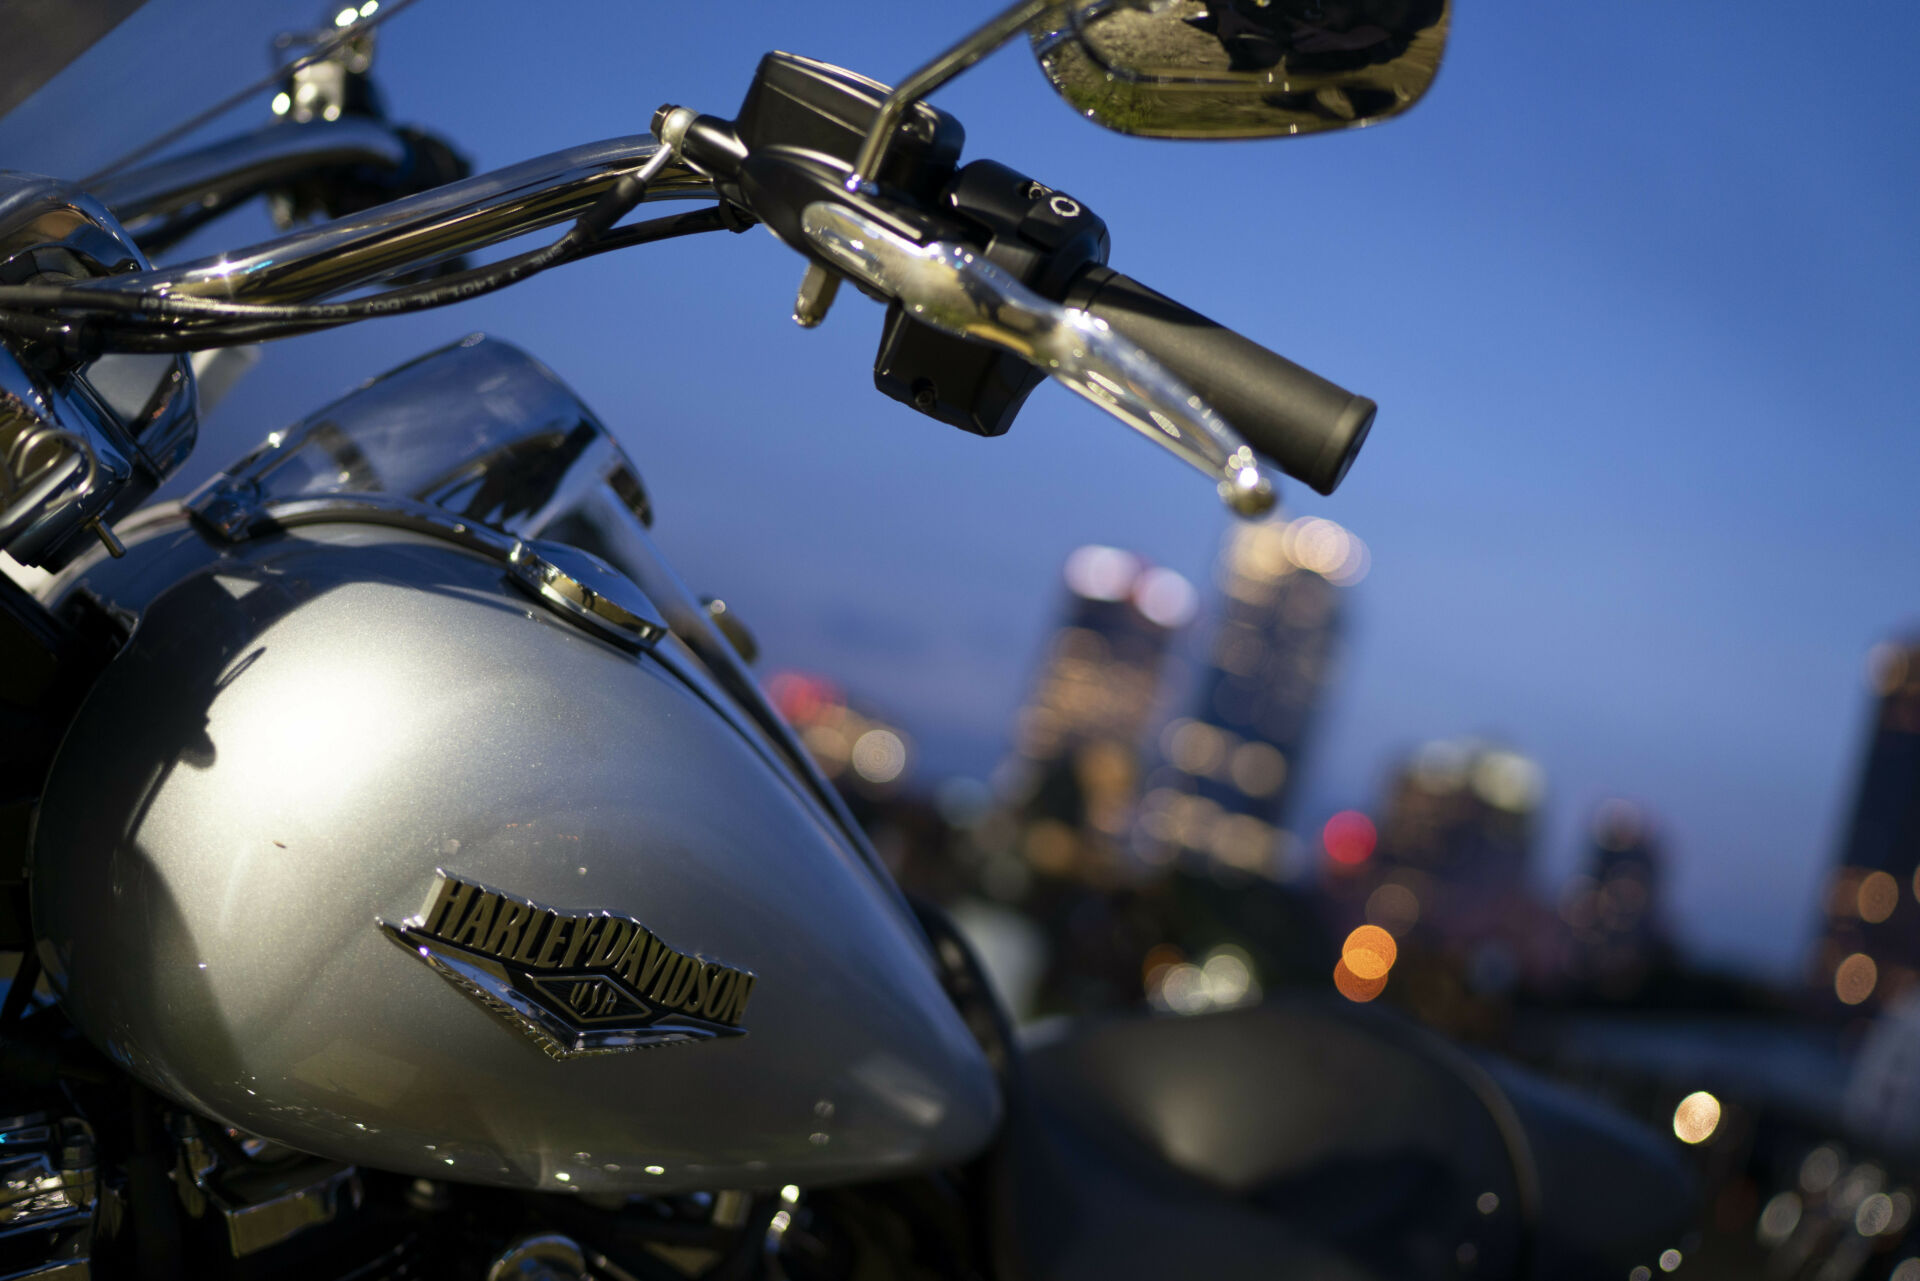 Harley-Davidson is kicking off its 120th anniversary celebration by announcing its 2023 motorcycle lineup January 18, 2023. Photo courtesy Harley-Davidson.